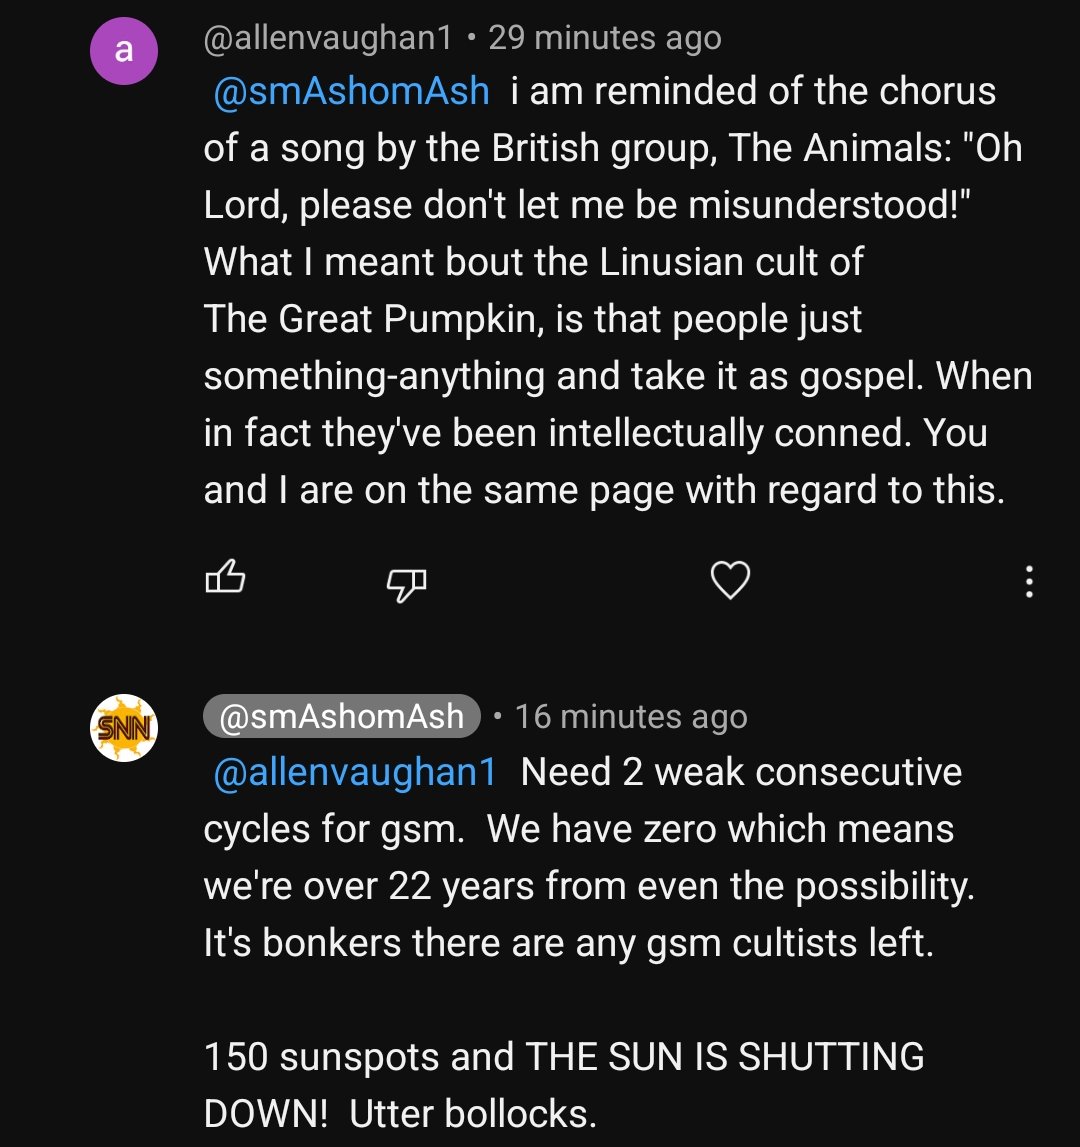 I like that term, '#linusian cult'. GSM (grand solar minimum), while still exalted by many many cultists, GSM belongs in the dustbin of forecasts. For at least 11.5 years, we can laugh about it, and if cycle 26 is weak they'll dust off the cult hymnals.